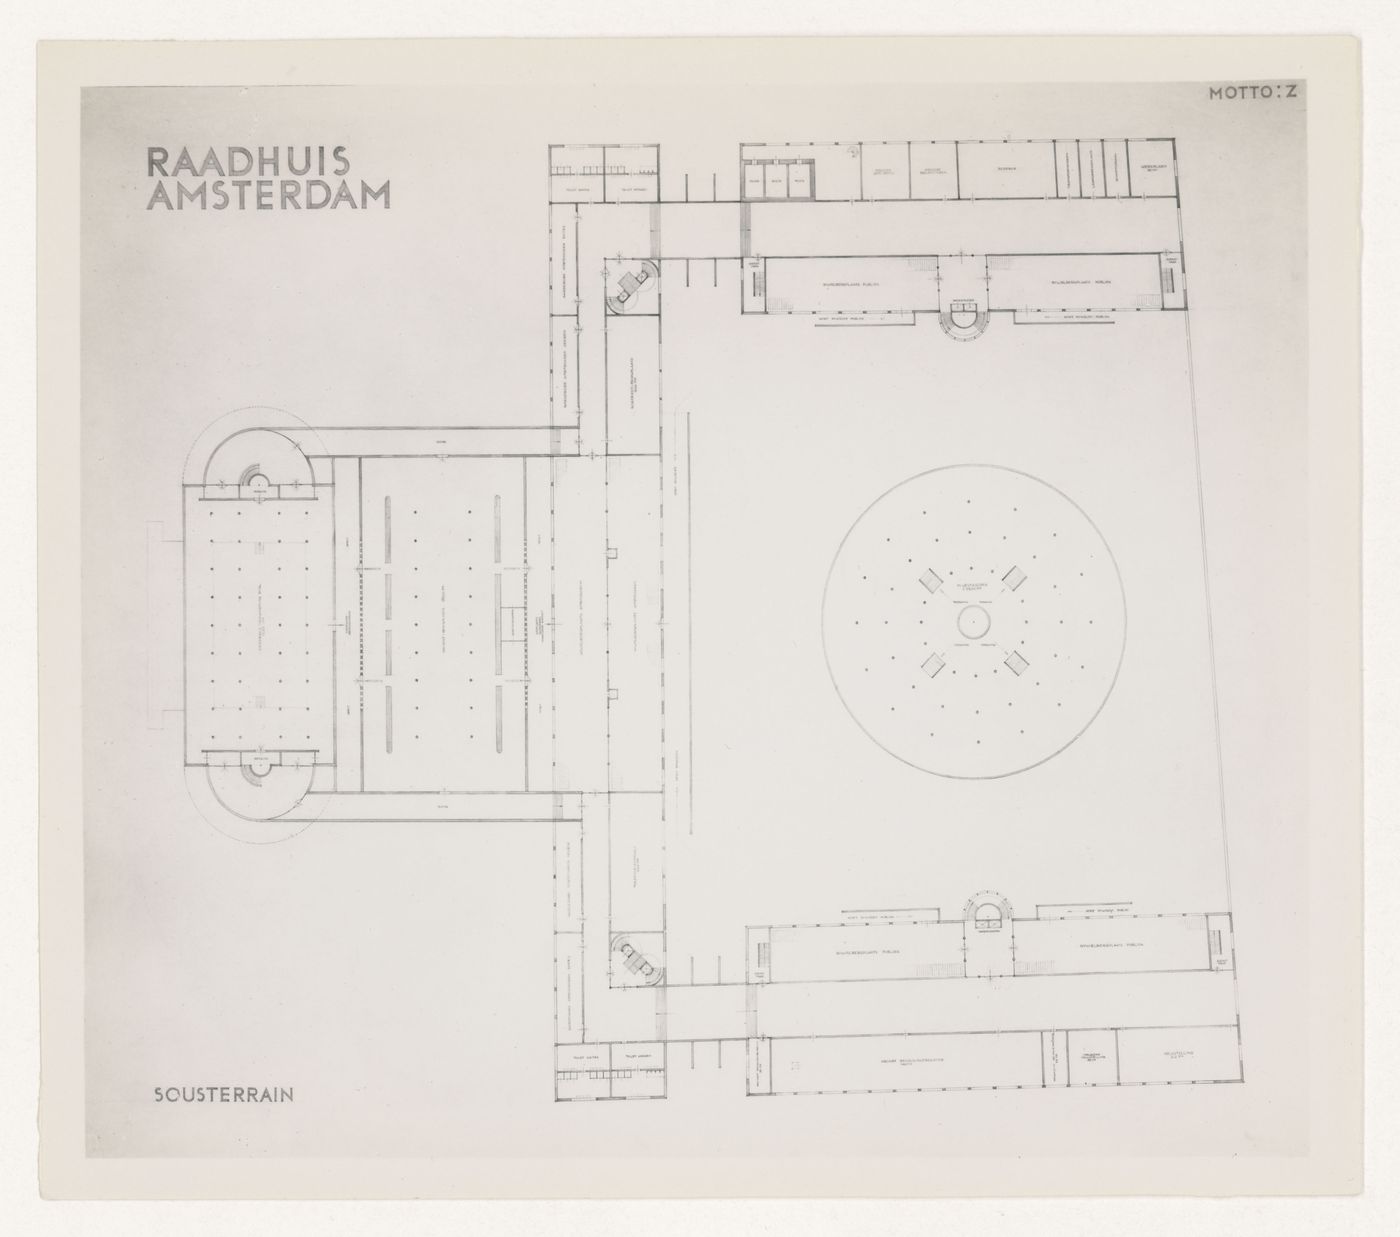 Photograph of a basement plan for J.J.P. Oud's competition entry for Amsterdam City Hall, Netherlands